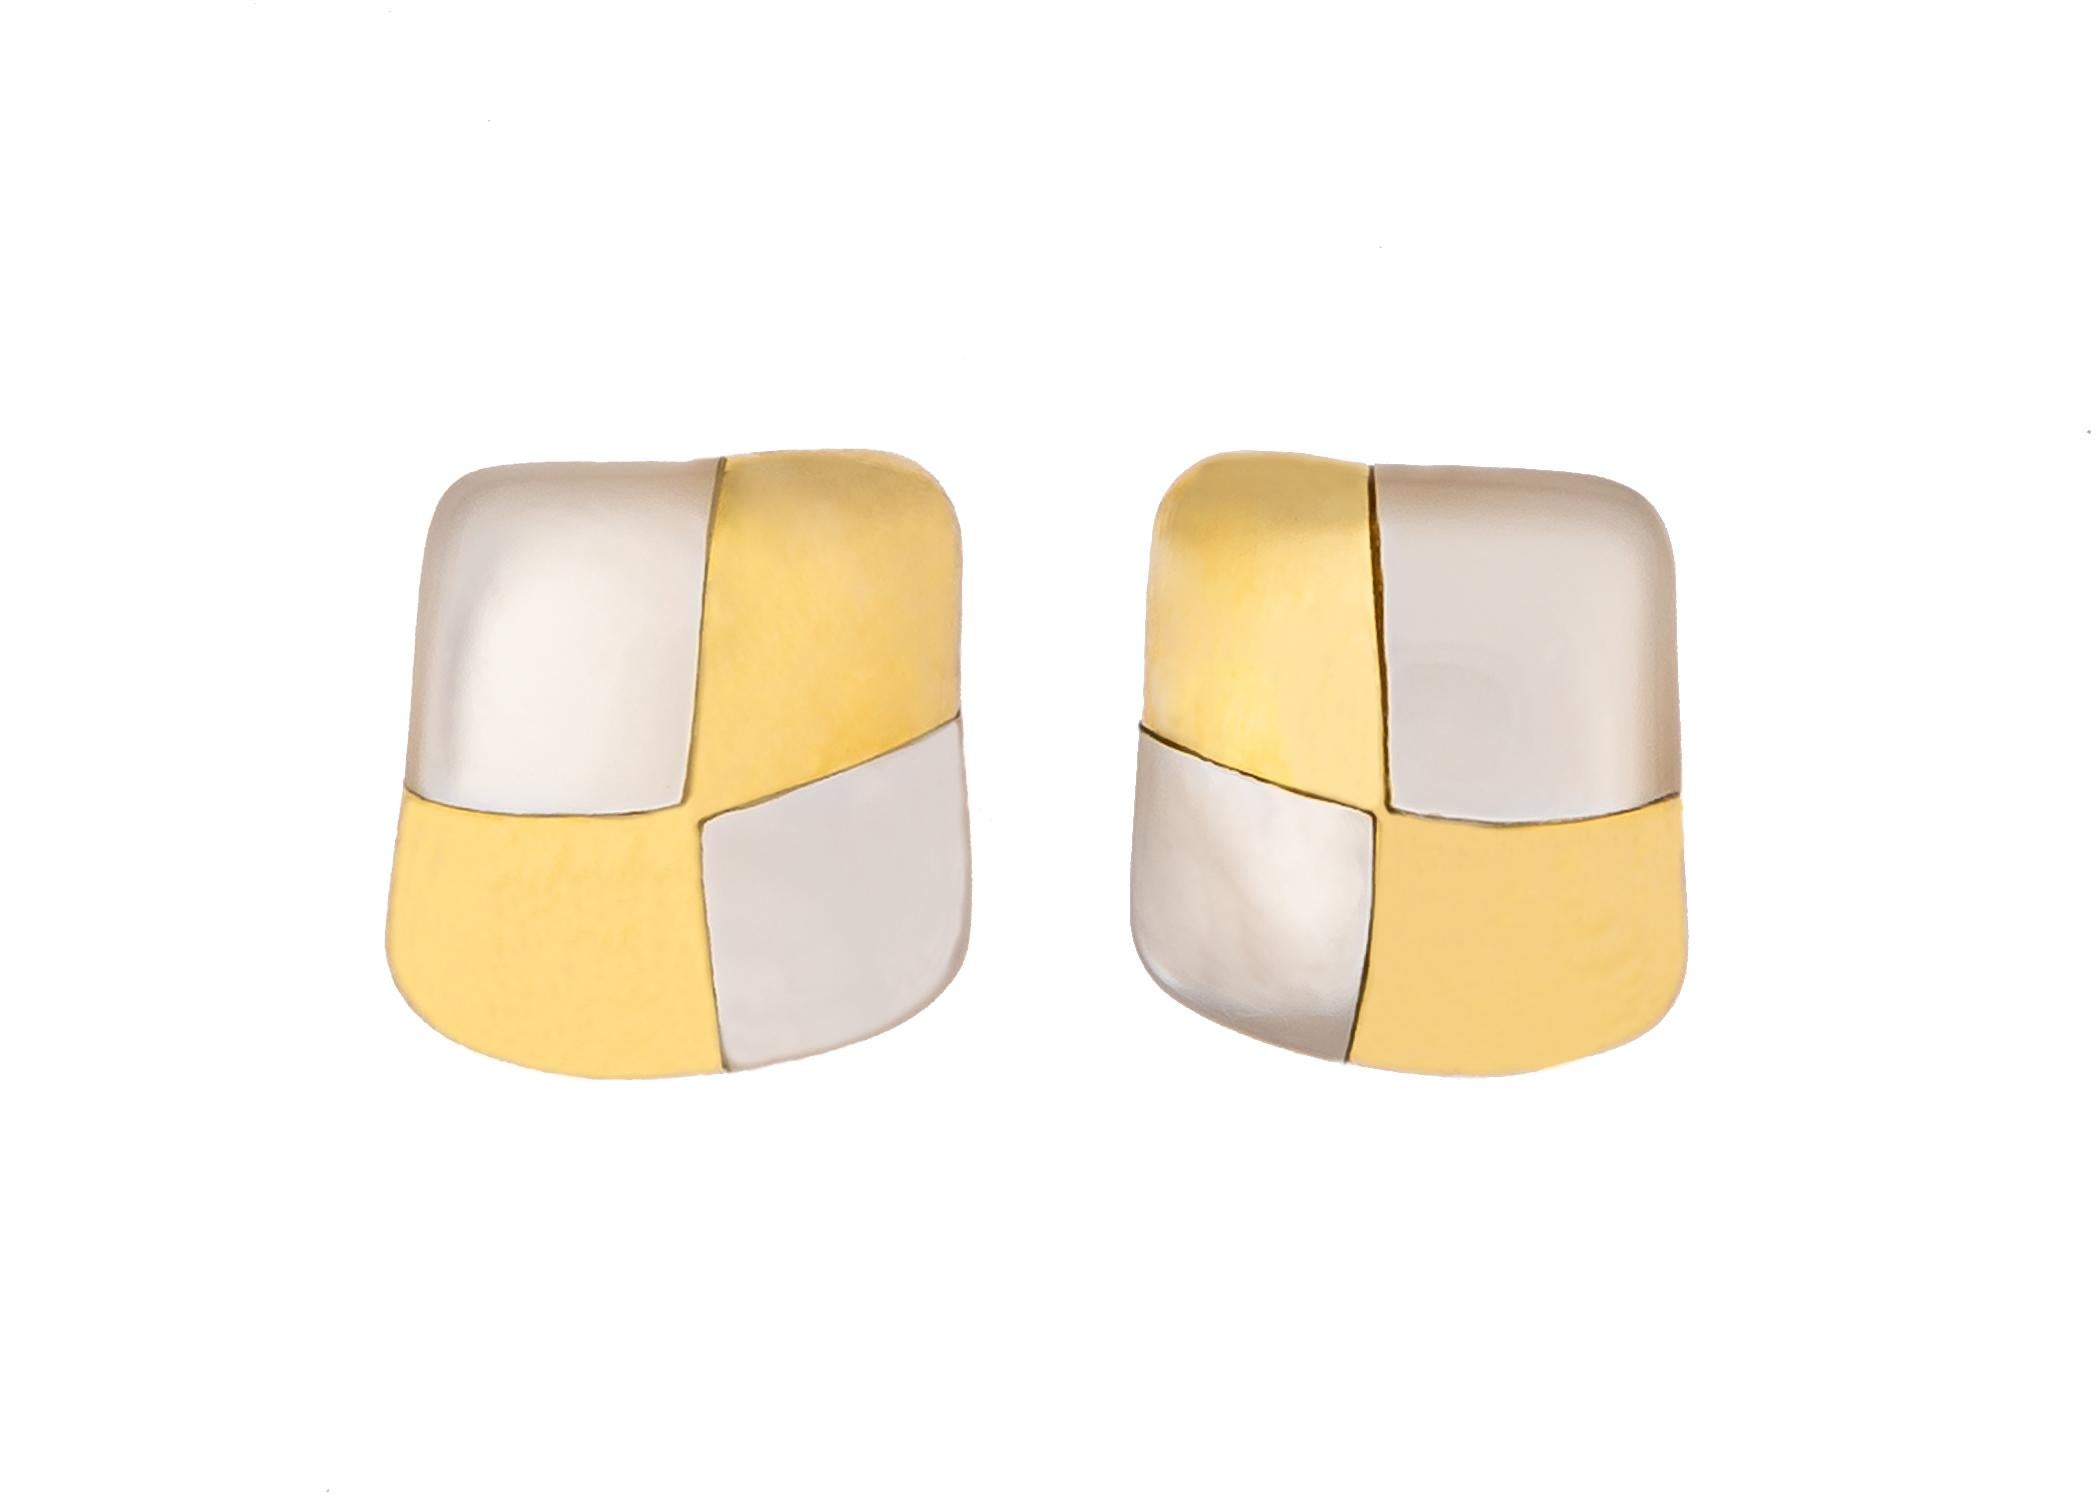 Angela Cummings began her career with Tiffany & Co. in 1967 and began her own company in 1984. Her designs are iconic and collectable. This simple checkerboard design features mother of pearl and 18k gold. A great easy to wear earring. 14.1mm in